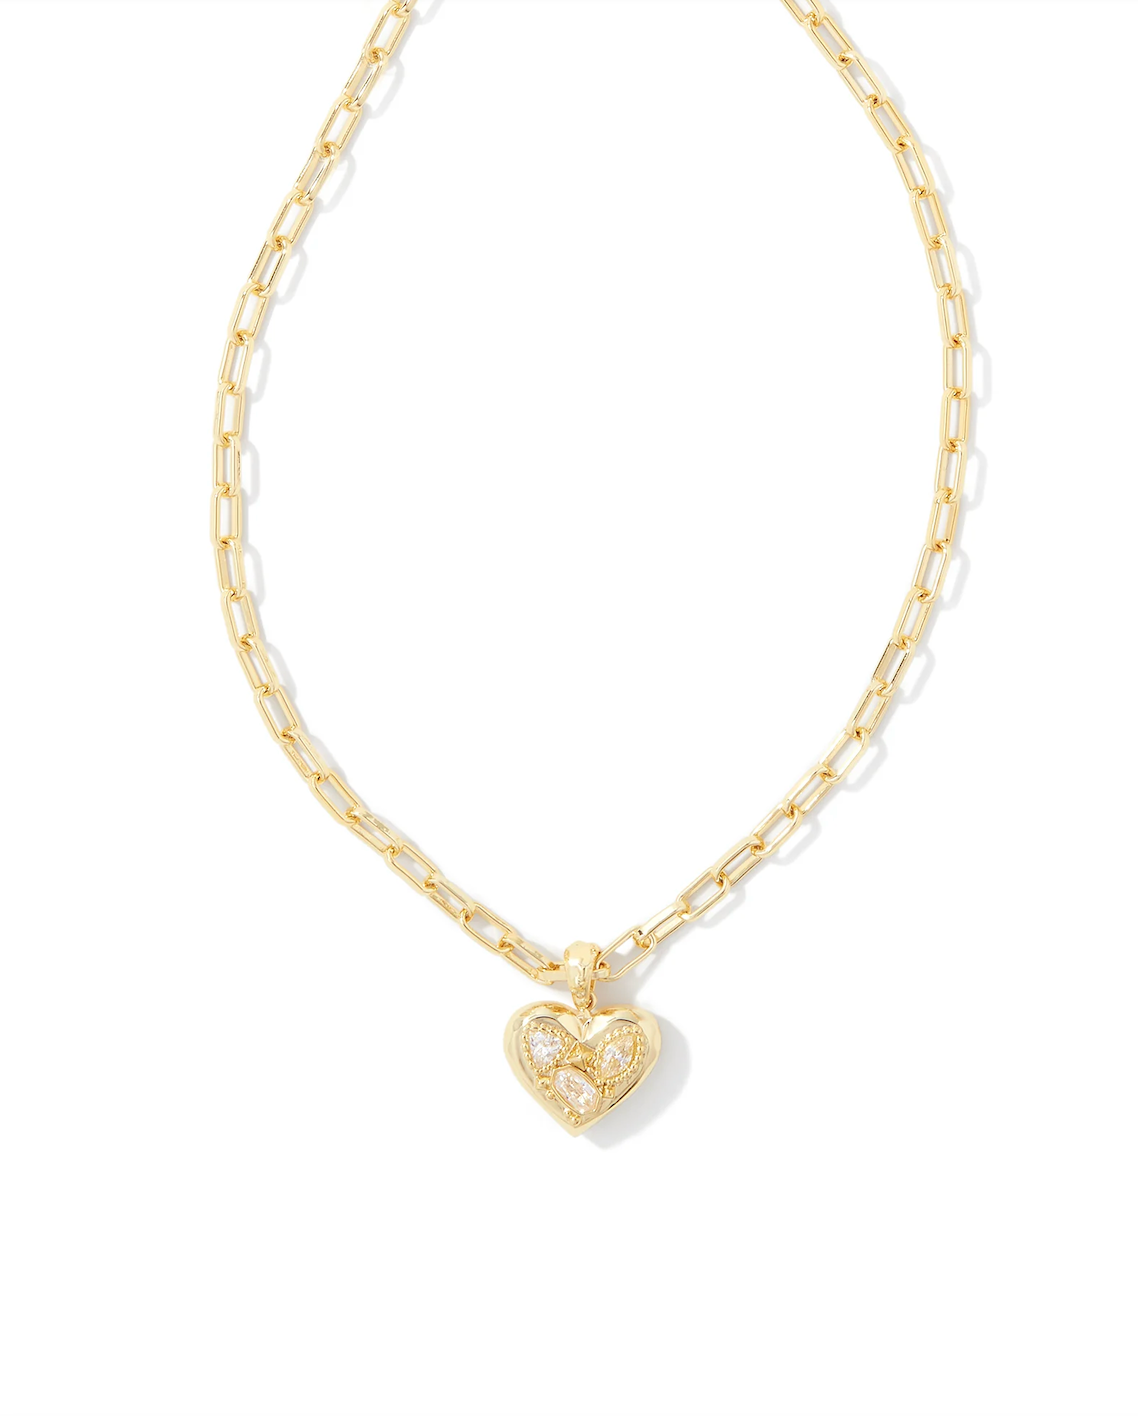 KENDRA SCOTT PENNY GOLD HEART SHORT PENDANT NECKLACE IN WHITE CRYSTAL